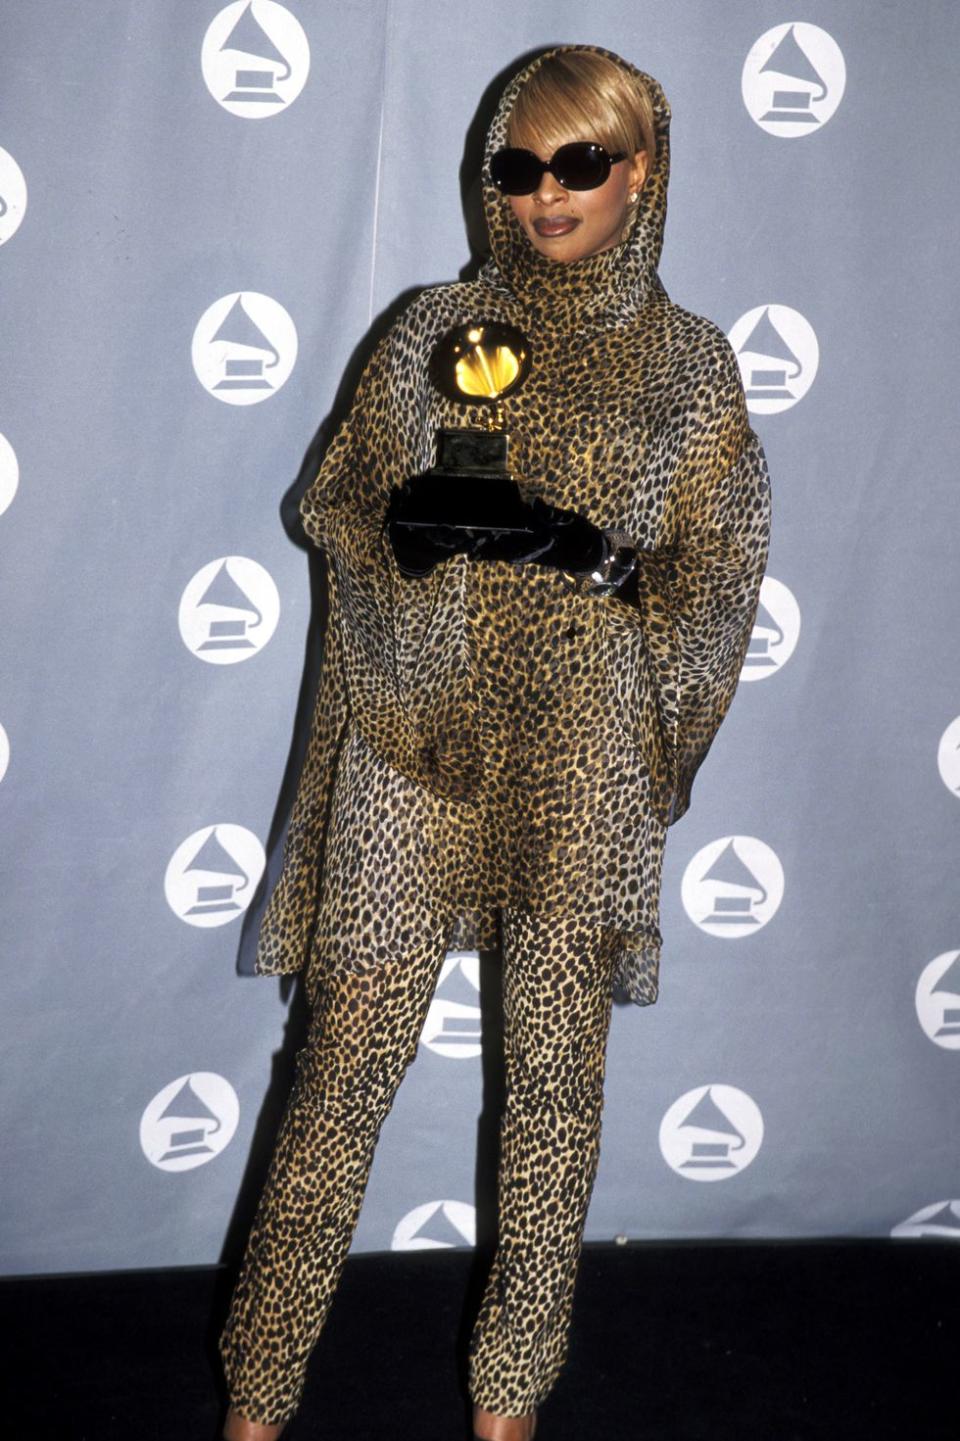 <p> In 1996, Mary J. Blige attended the Grammy Awards wearing a full leopard print ensemble with velvet gloves and dark sunglasses. It's safe to say this print will never go out of style. What a lewk. </p>